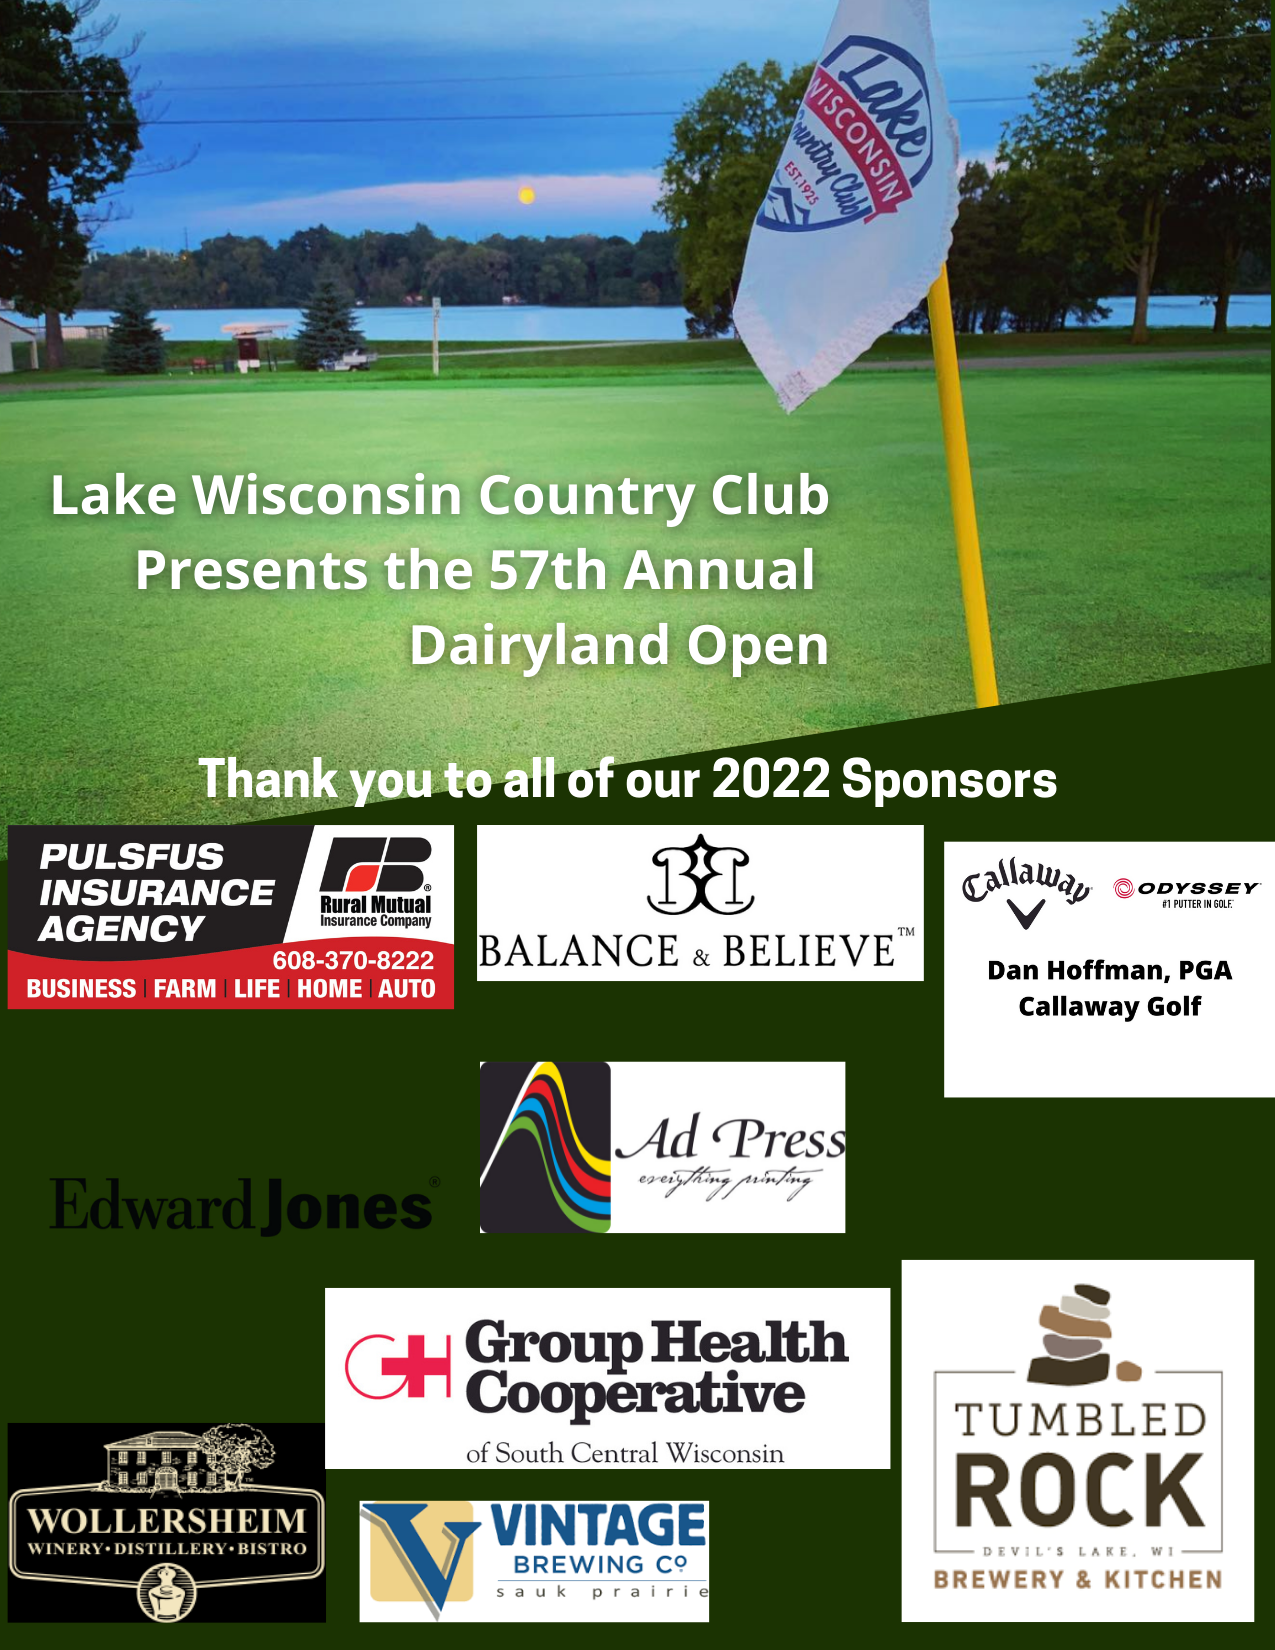 lake wisconsin country club tee times